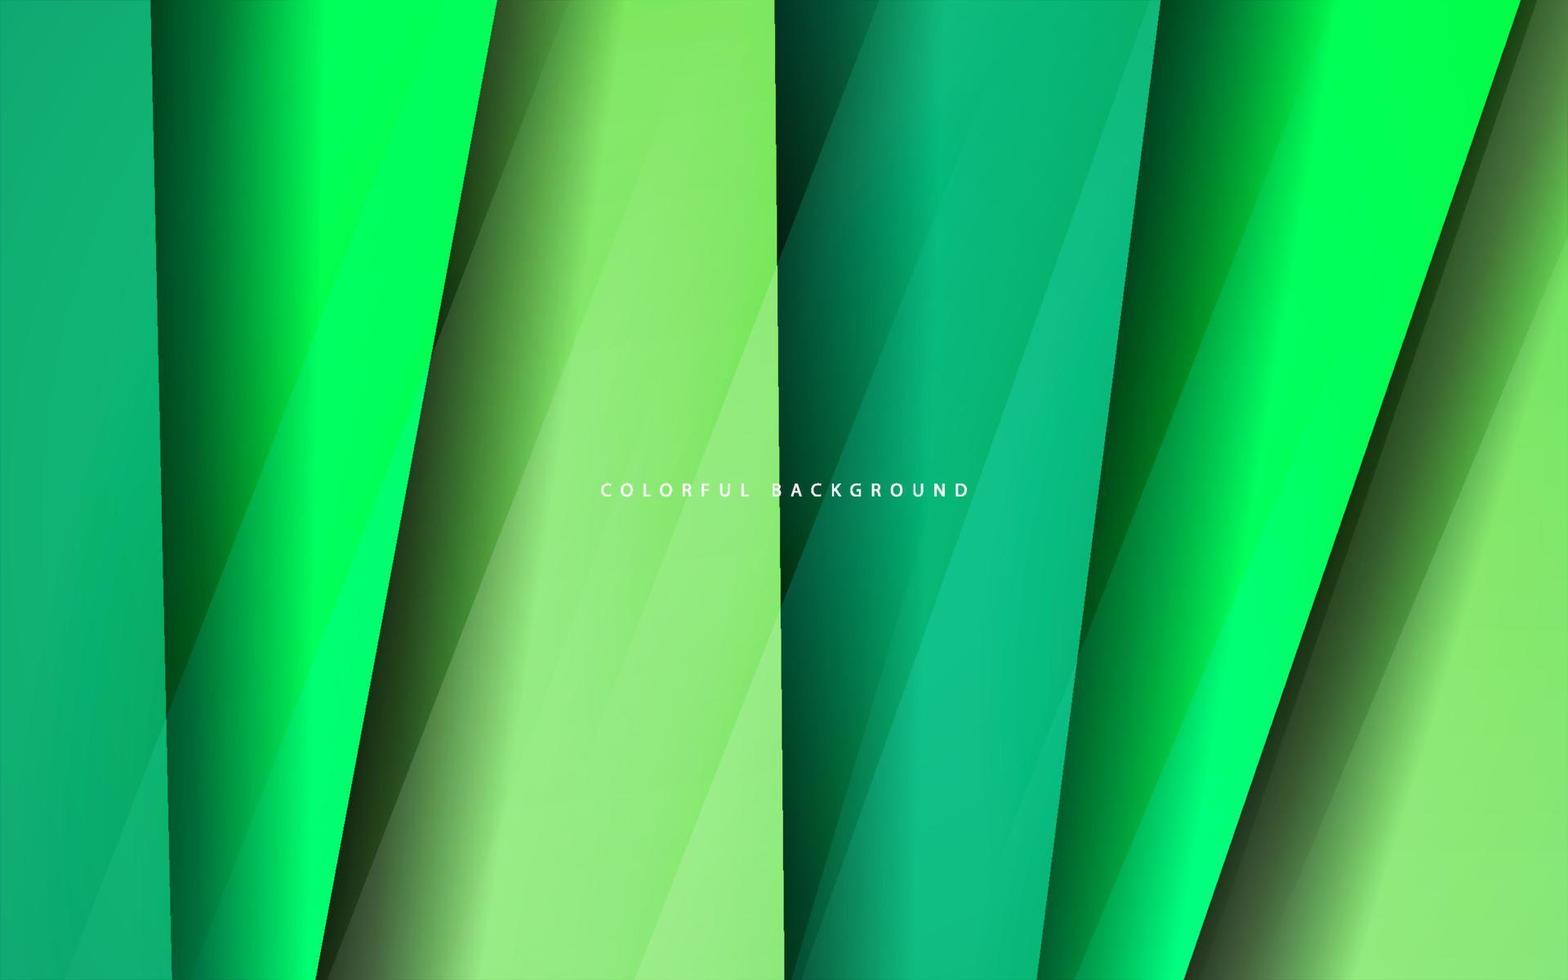 Abstract overlap layer green contrast background vector